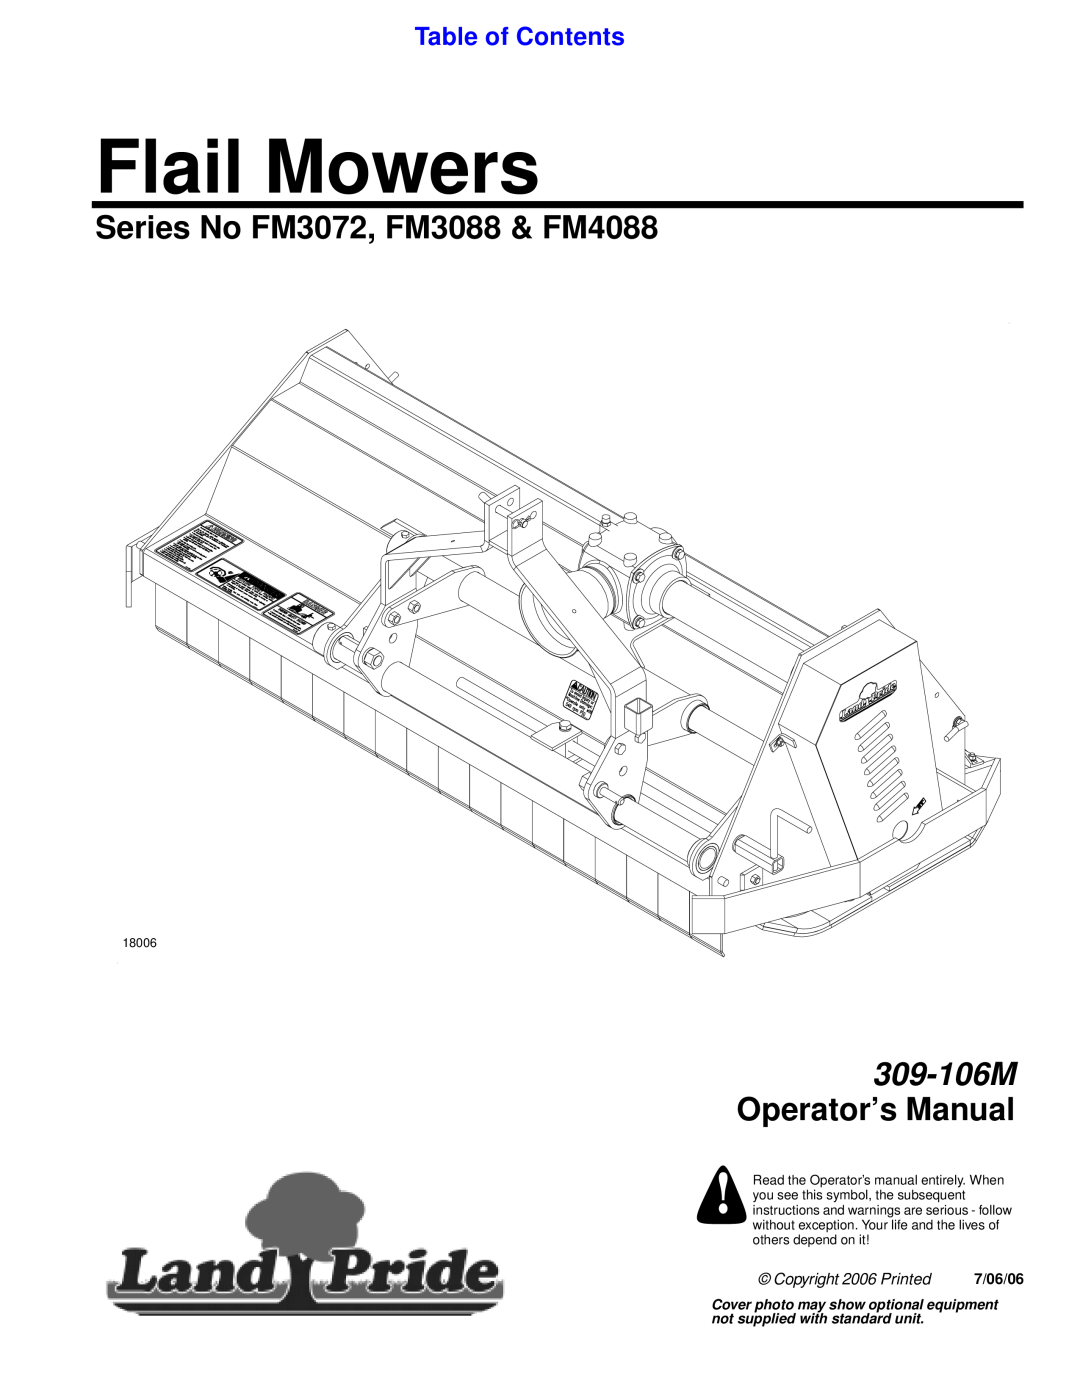 Land Pride manual Series No FM3072, FM3088 & FM4088, Table of Contents, Flail Mowers, 309-106M Operator’s Manual, 18006 